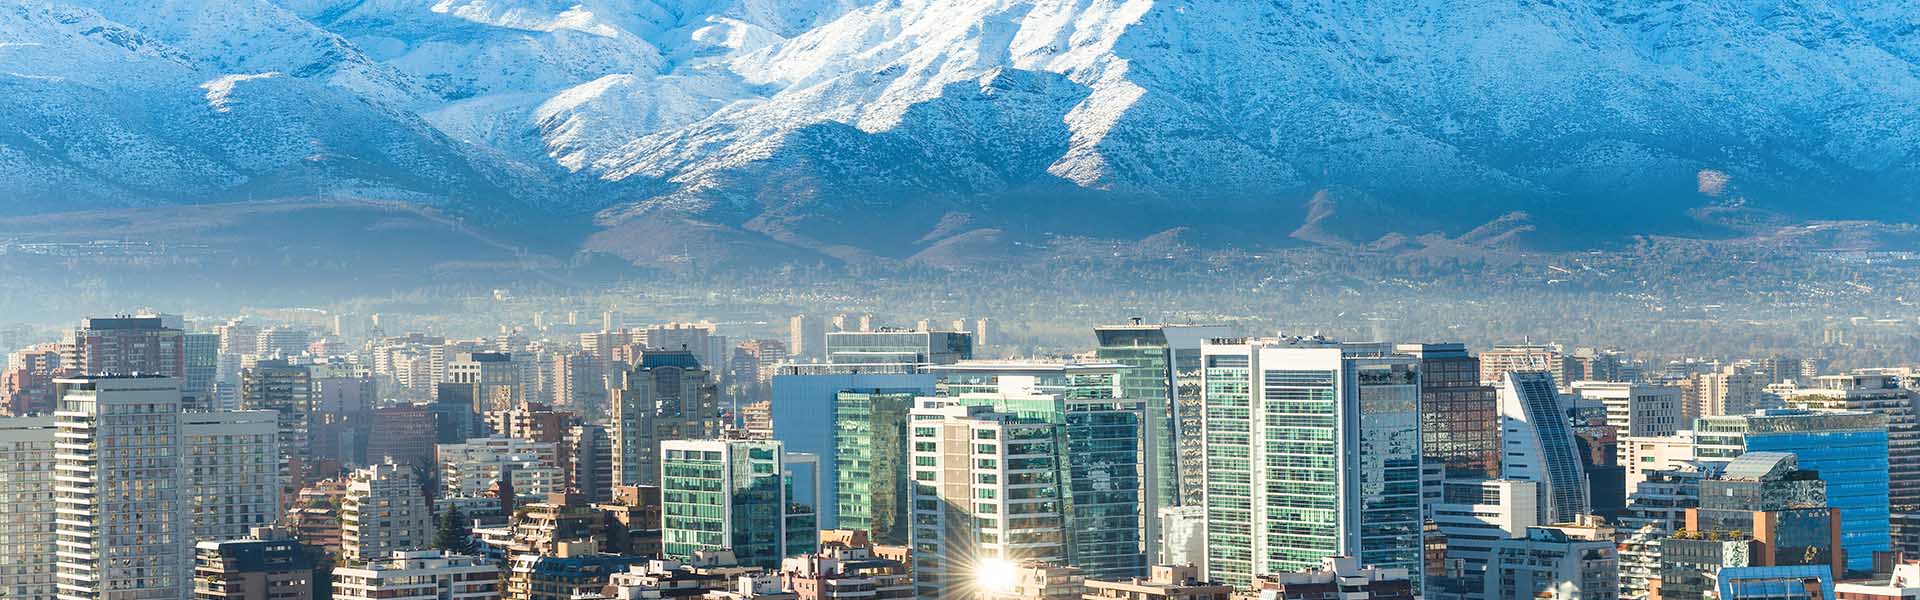 Four reasons to put Chile’s Santiago on your New Year wish list